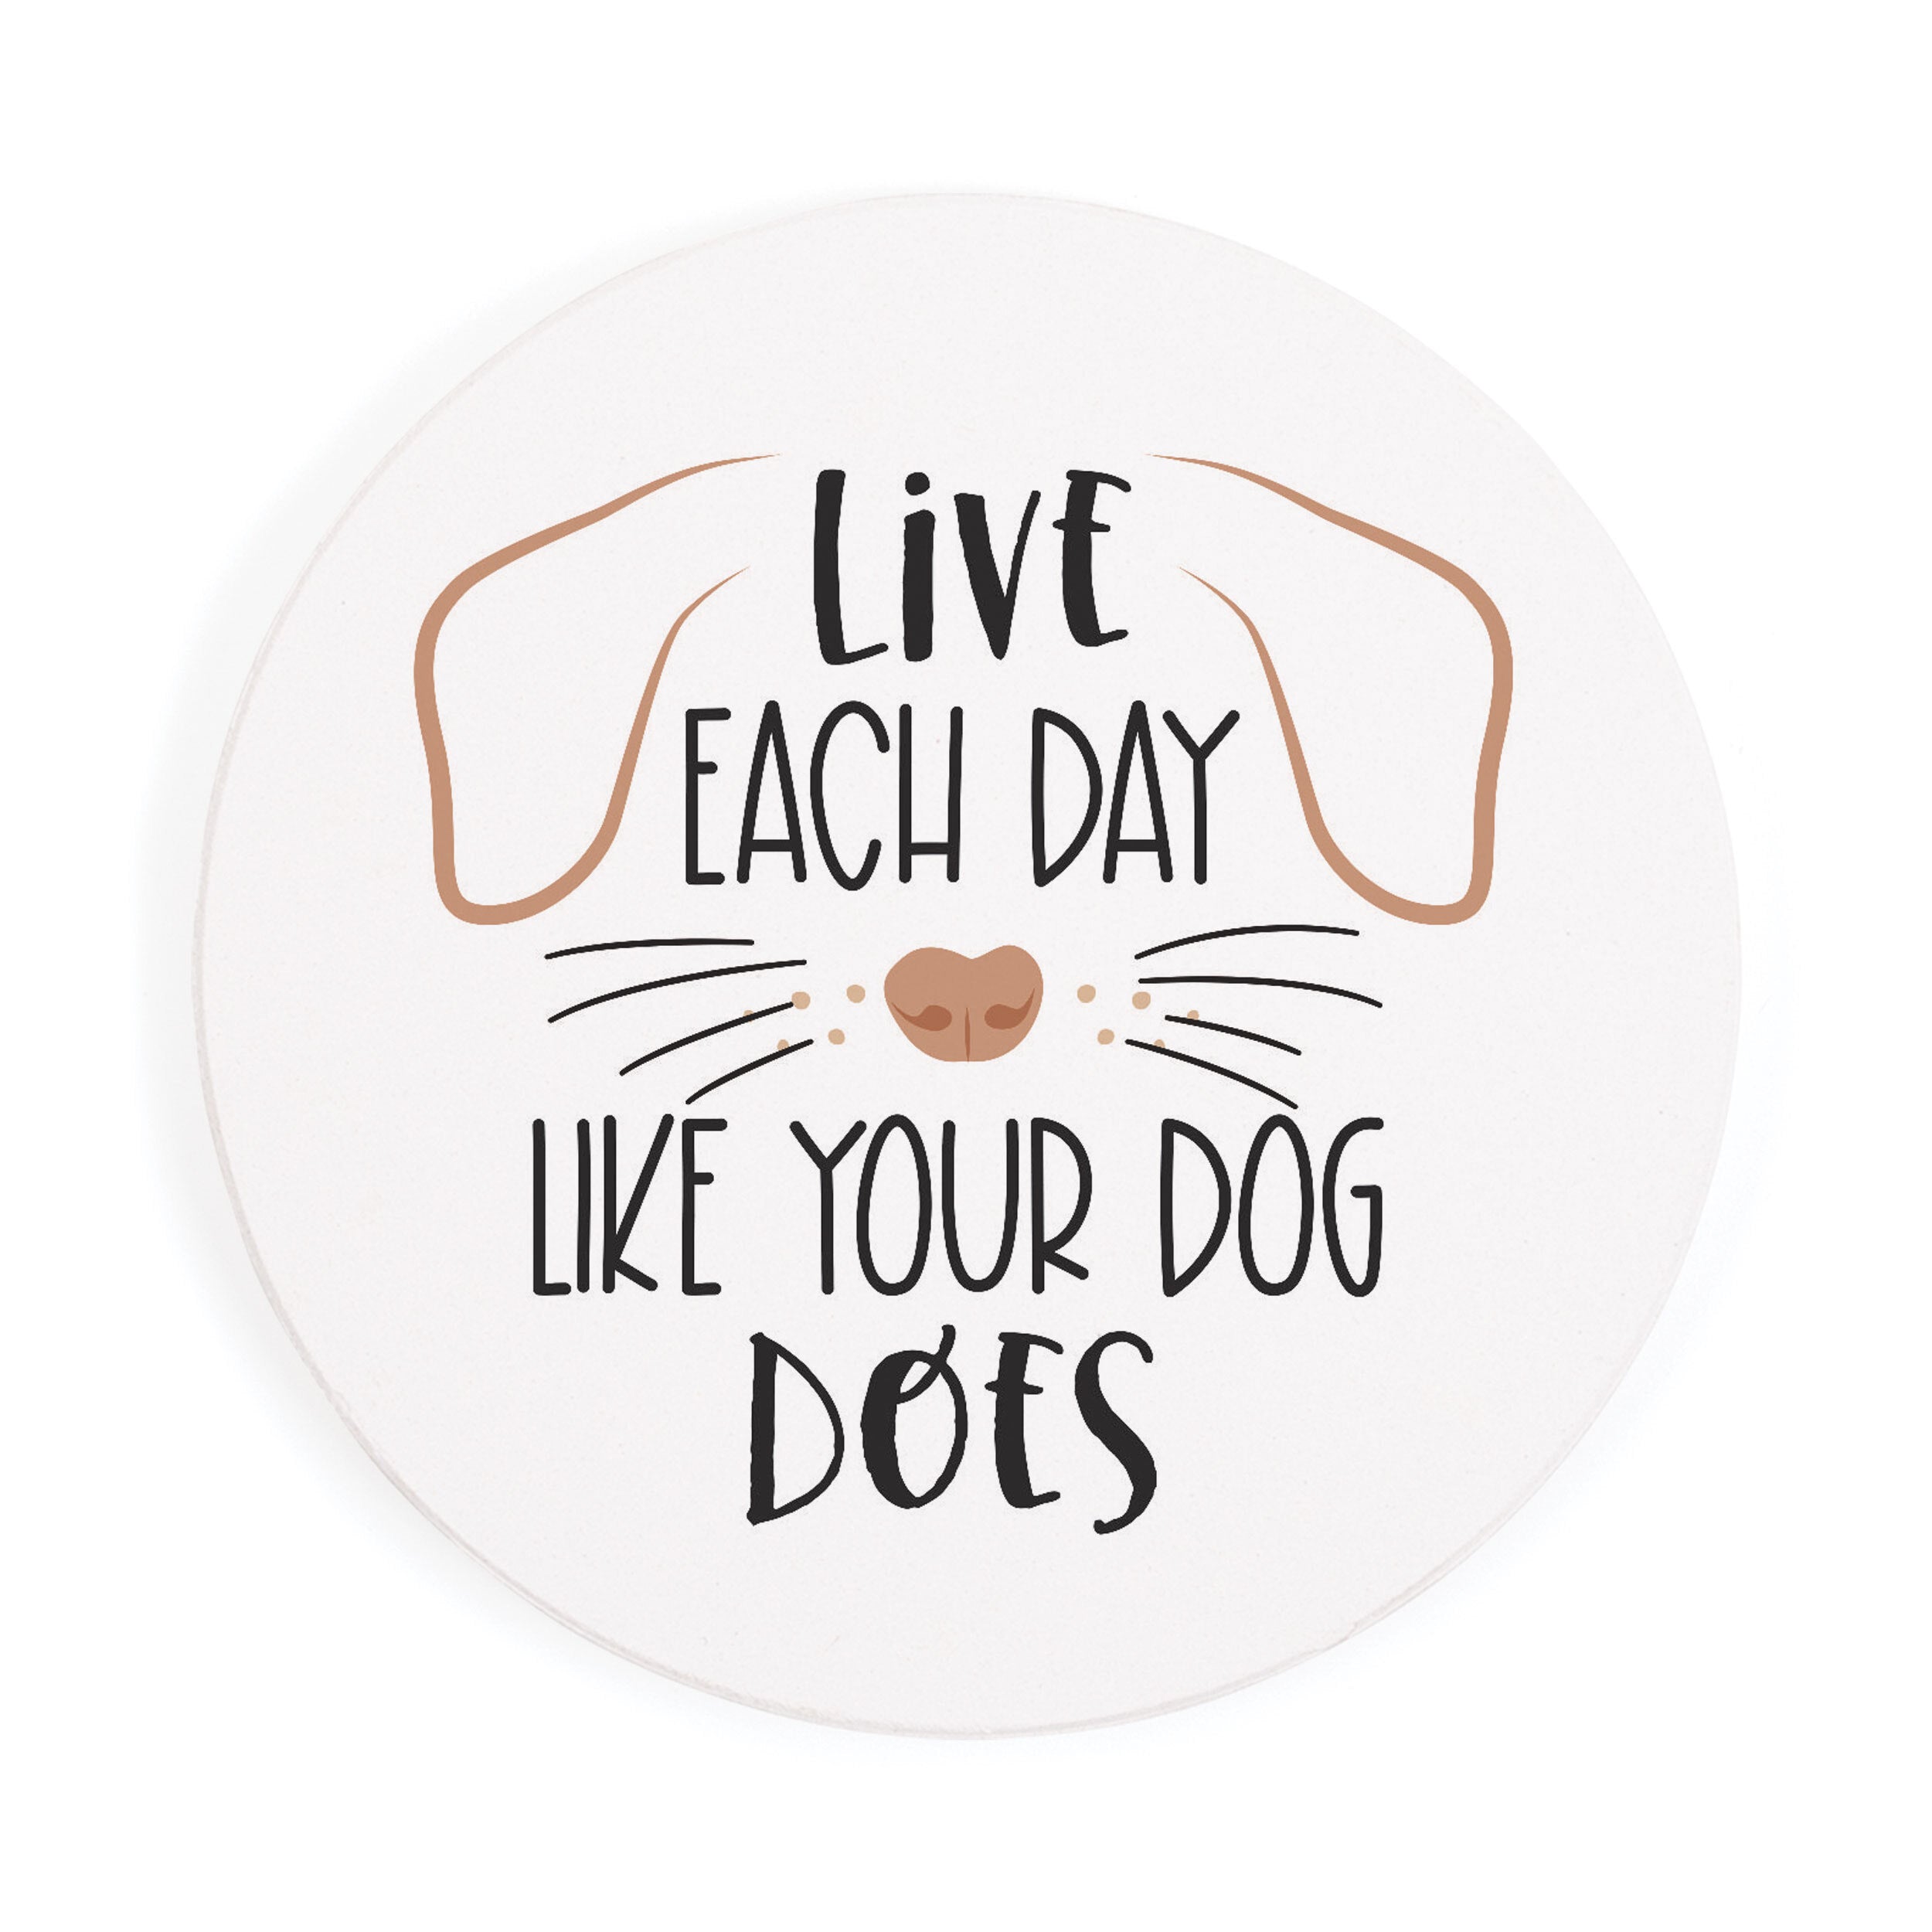 Live Each Day Like Your Dog Does Round Coaster